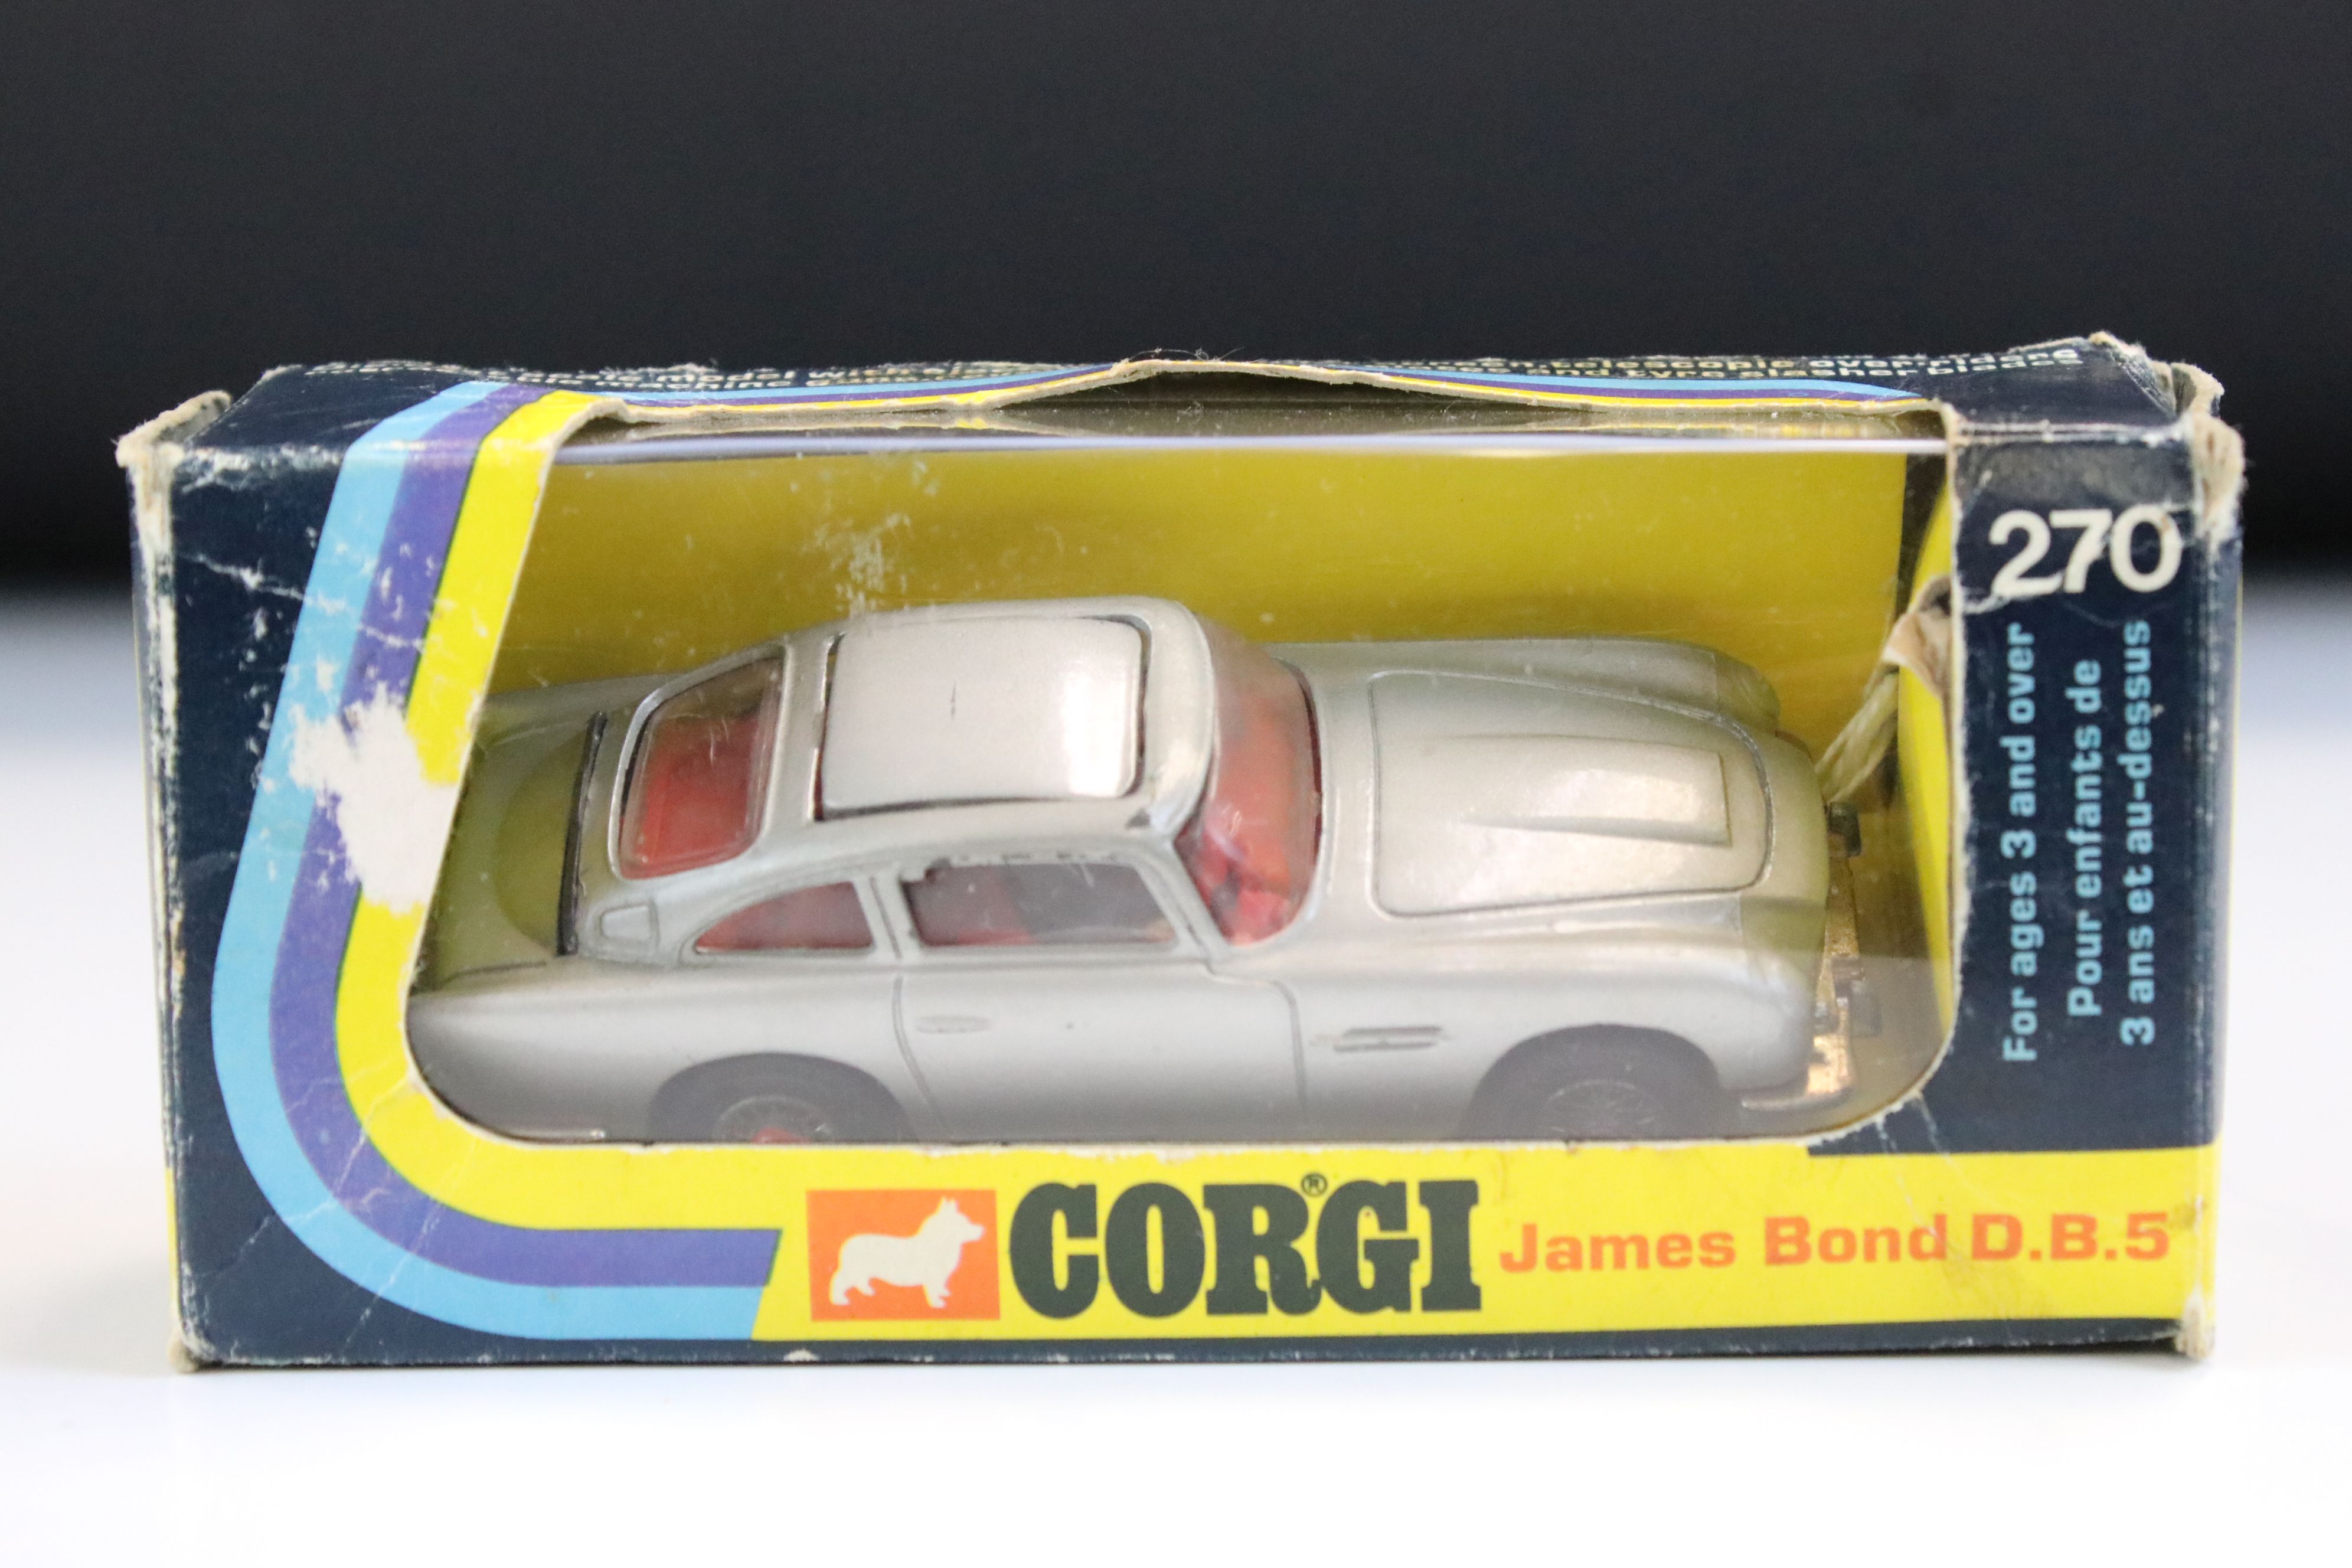 Boxed Corgi 270 James Bond 007 DB5 with secret instructions, diecast gd with a few paint chips, - Image 12 of 12